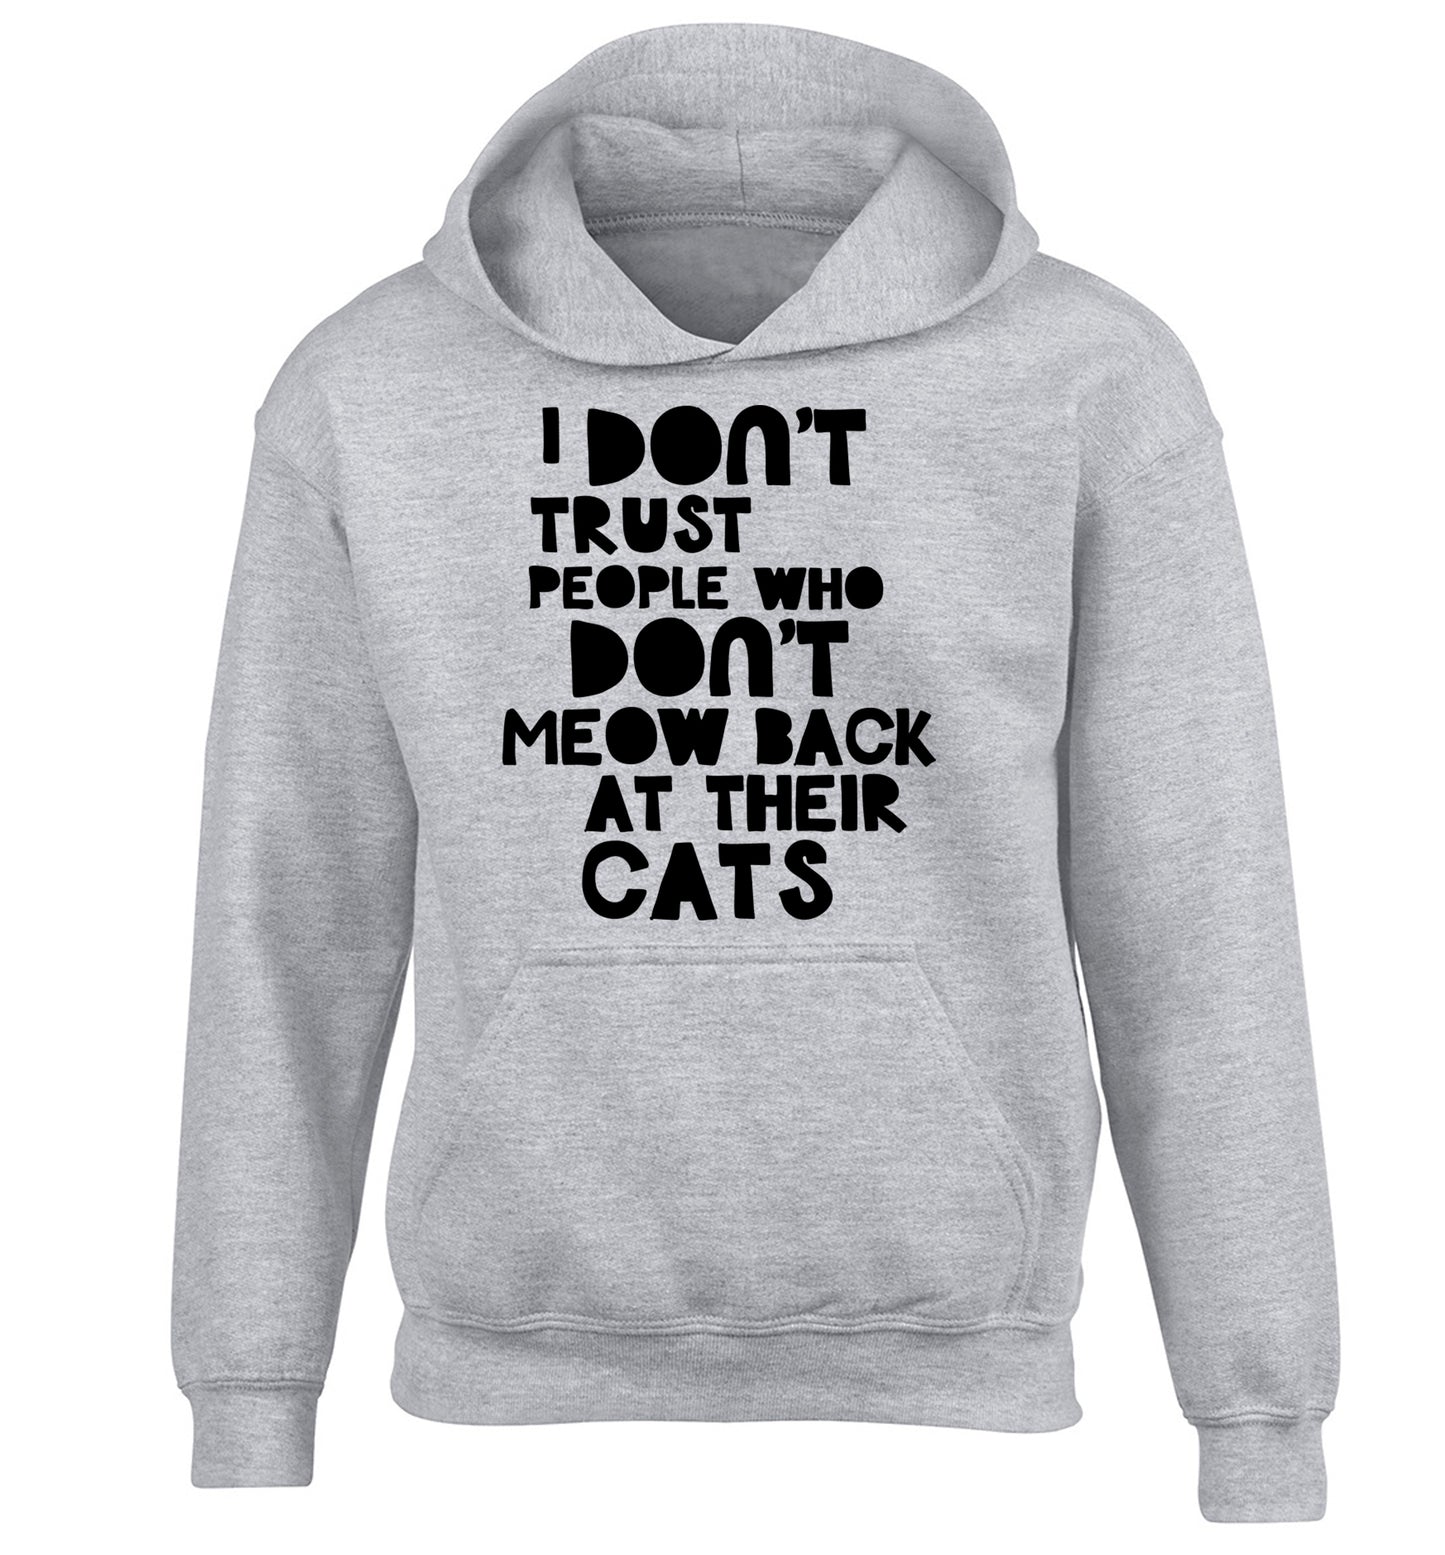 I don't trust people who don't meow back at their cats children's grey hoodie 12-13 Years